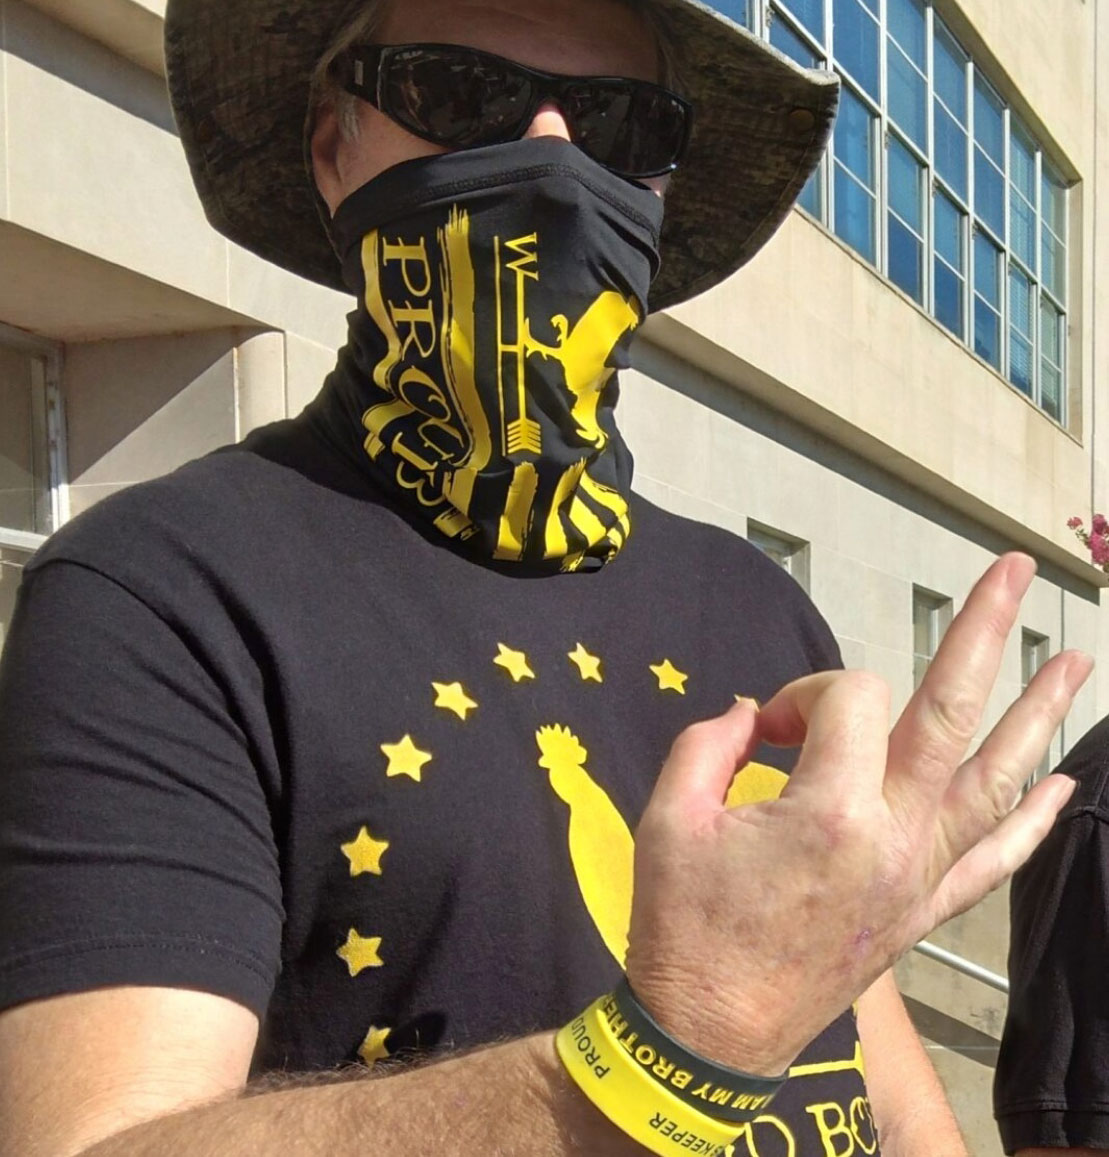 man wearing sunglasses and mask and yellow and black 'proud boys' t-shirt makes the 'ok' symbol